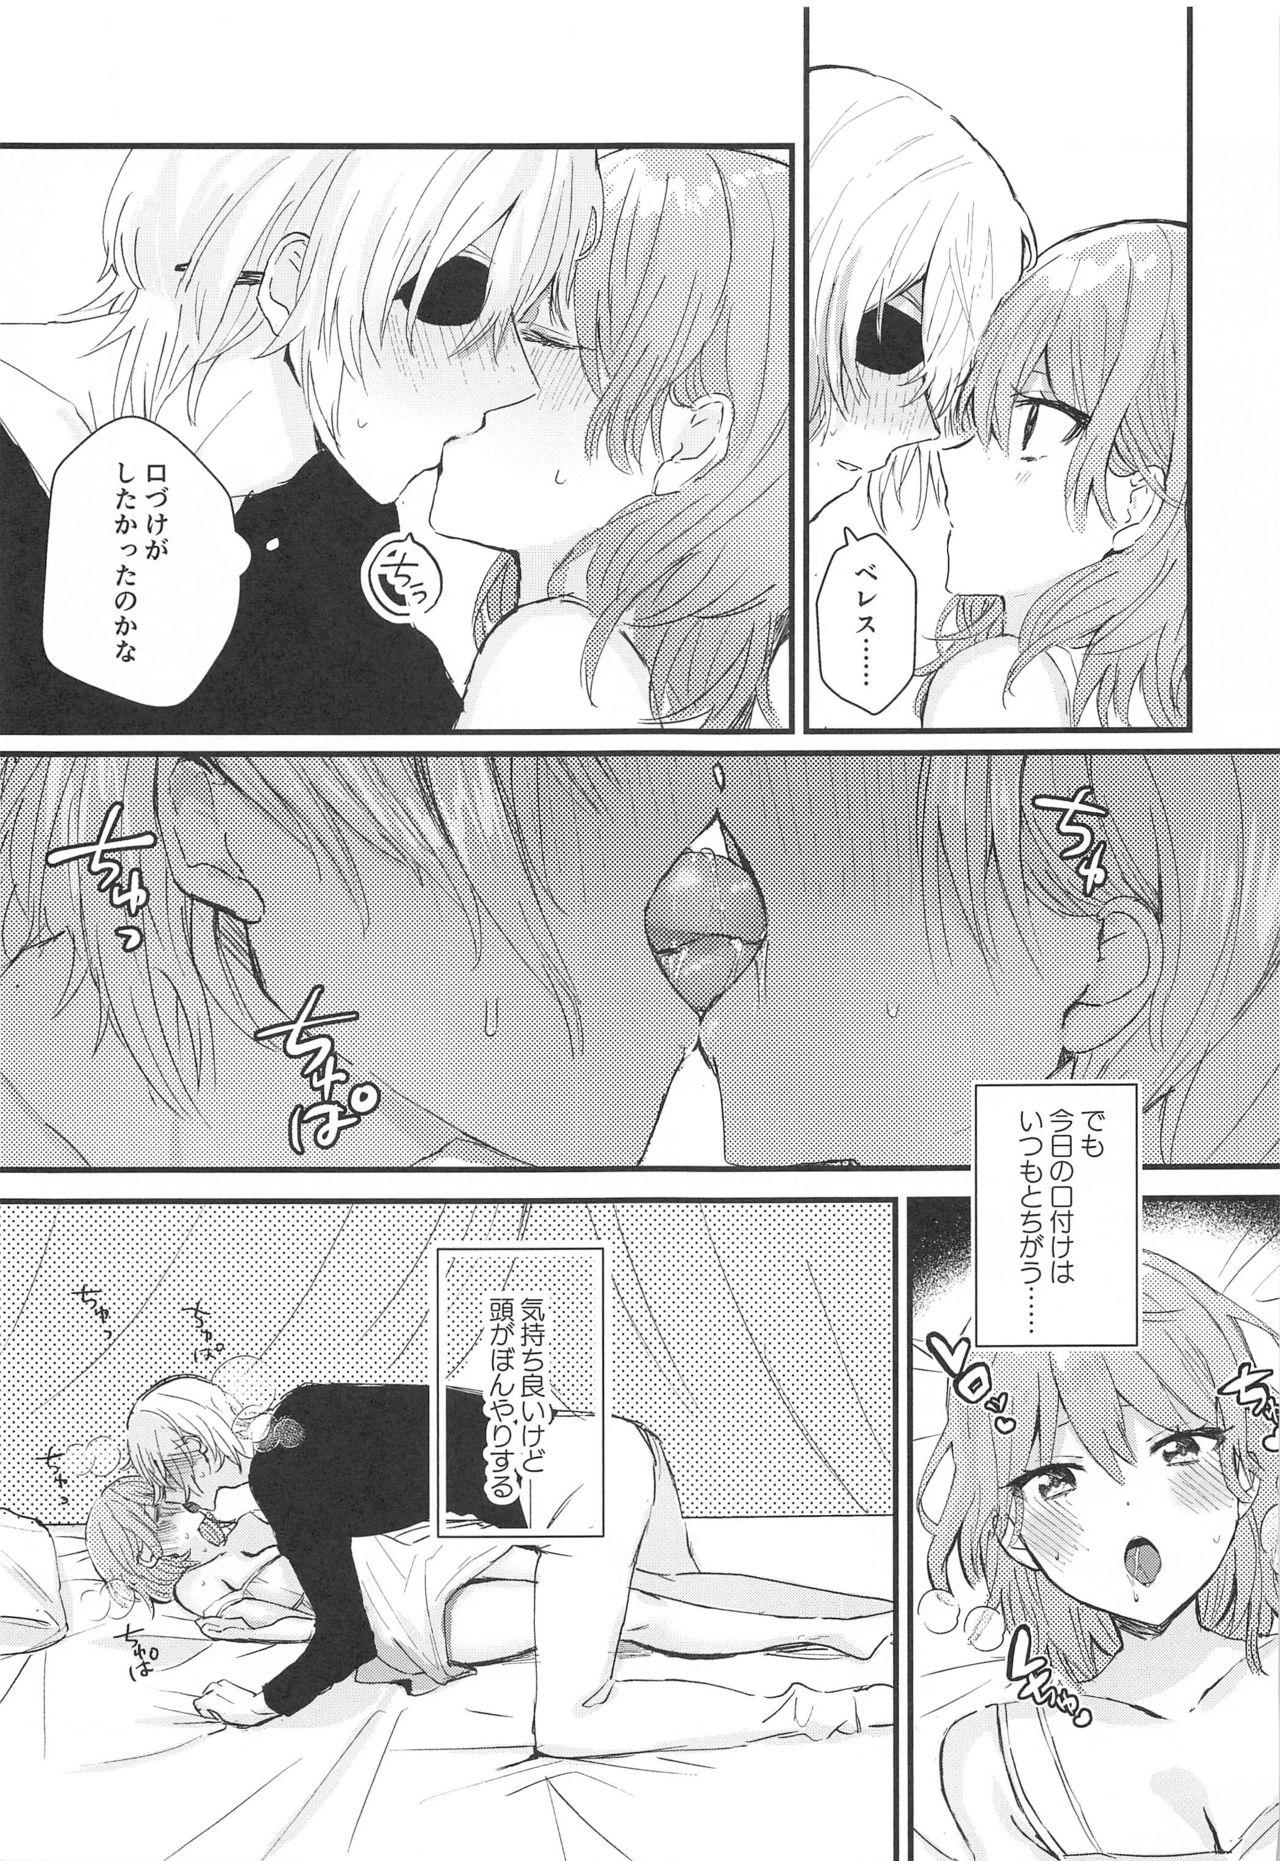 White Girl Sensei no Hatena - What the professor doesn't know - Fire emblem three houses Dominate - Page 6